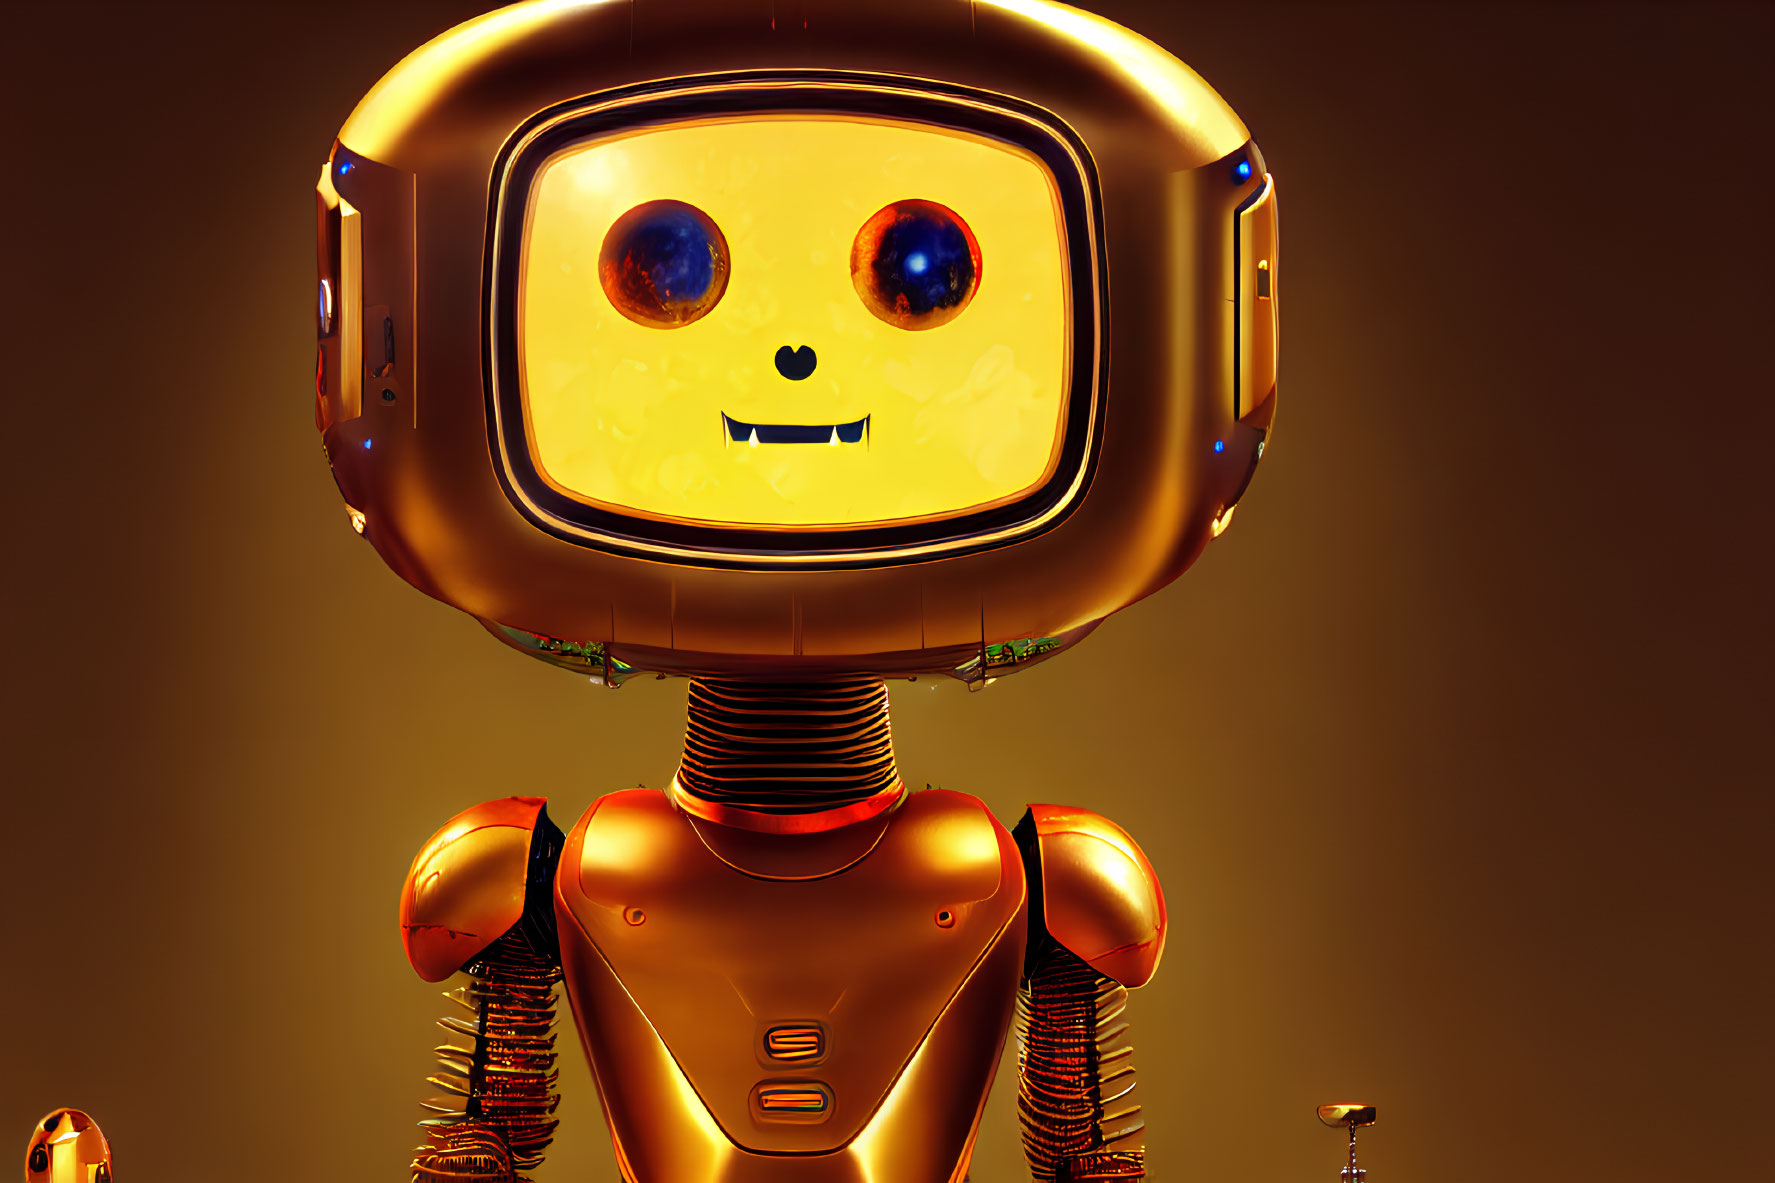 Orange Square-Headed Robot with Blue Eyes and Smile on Golden Background